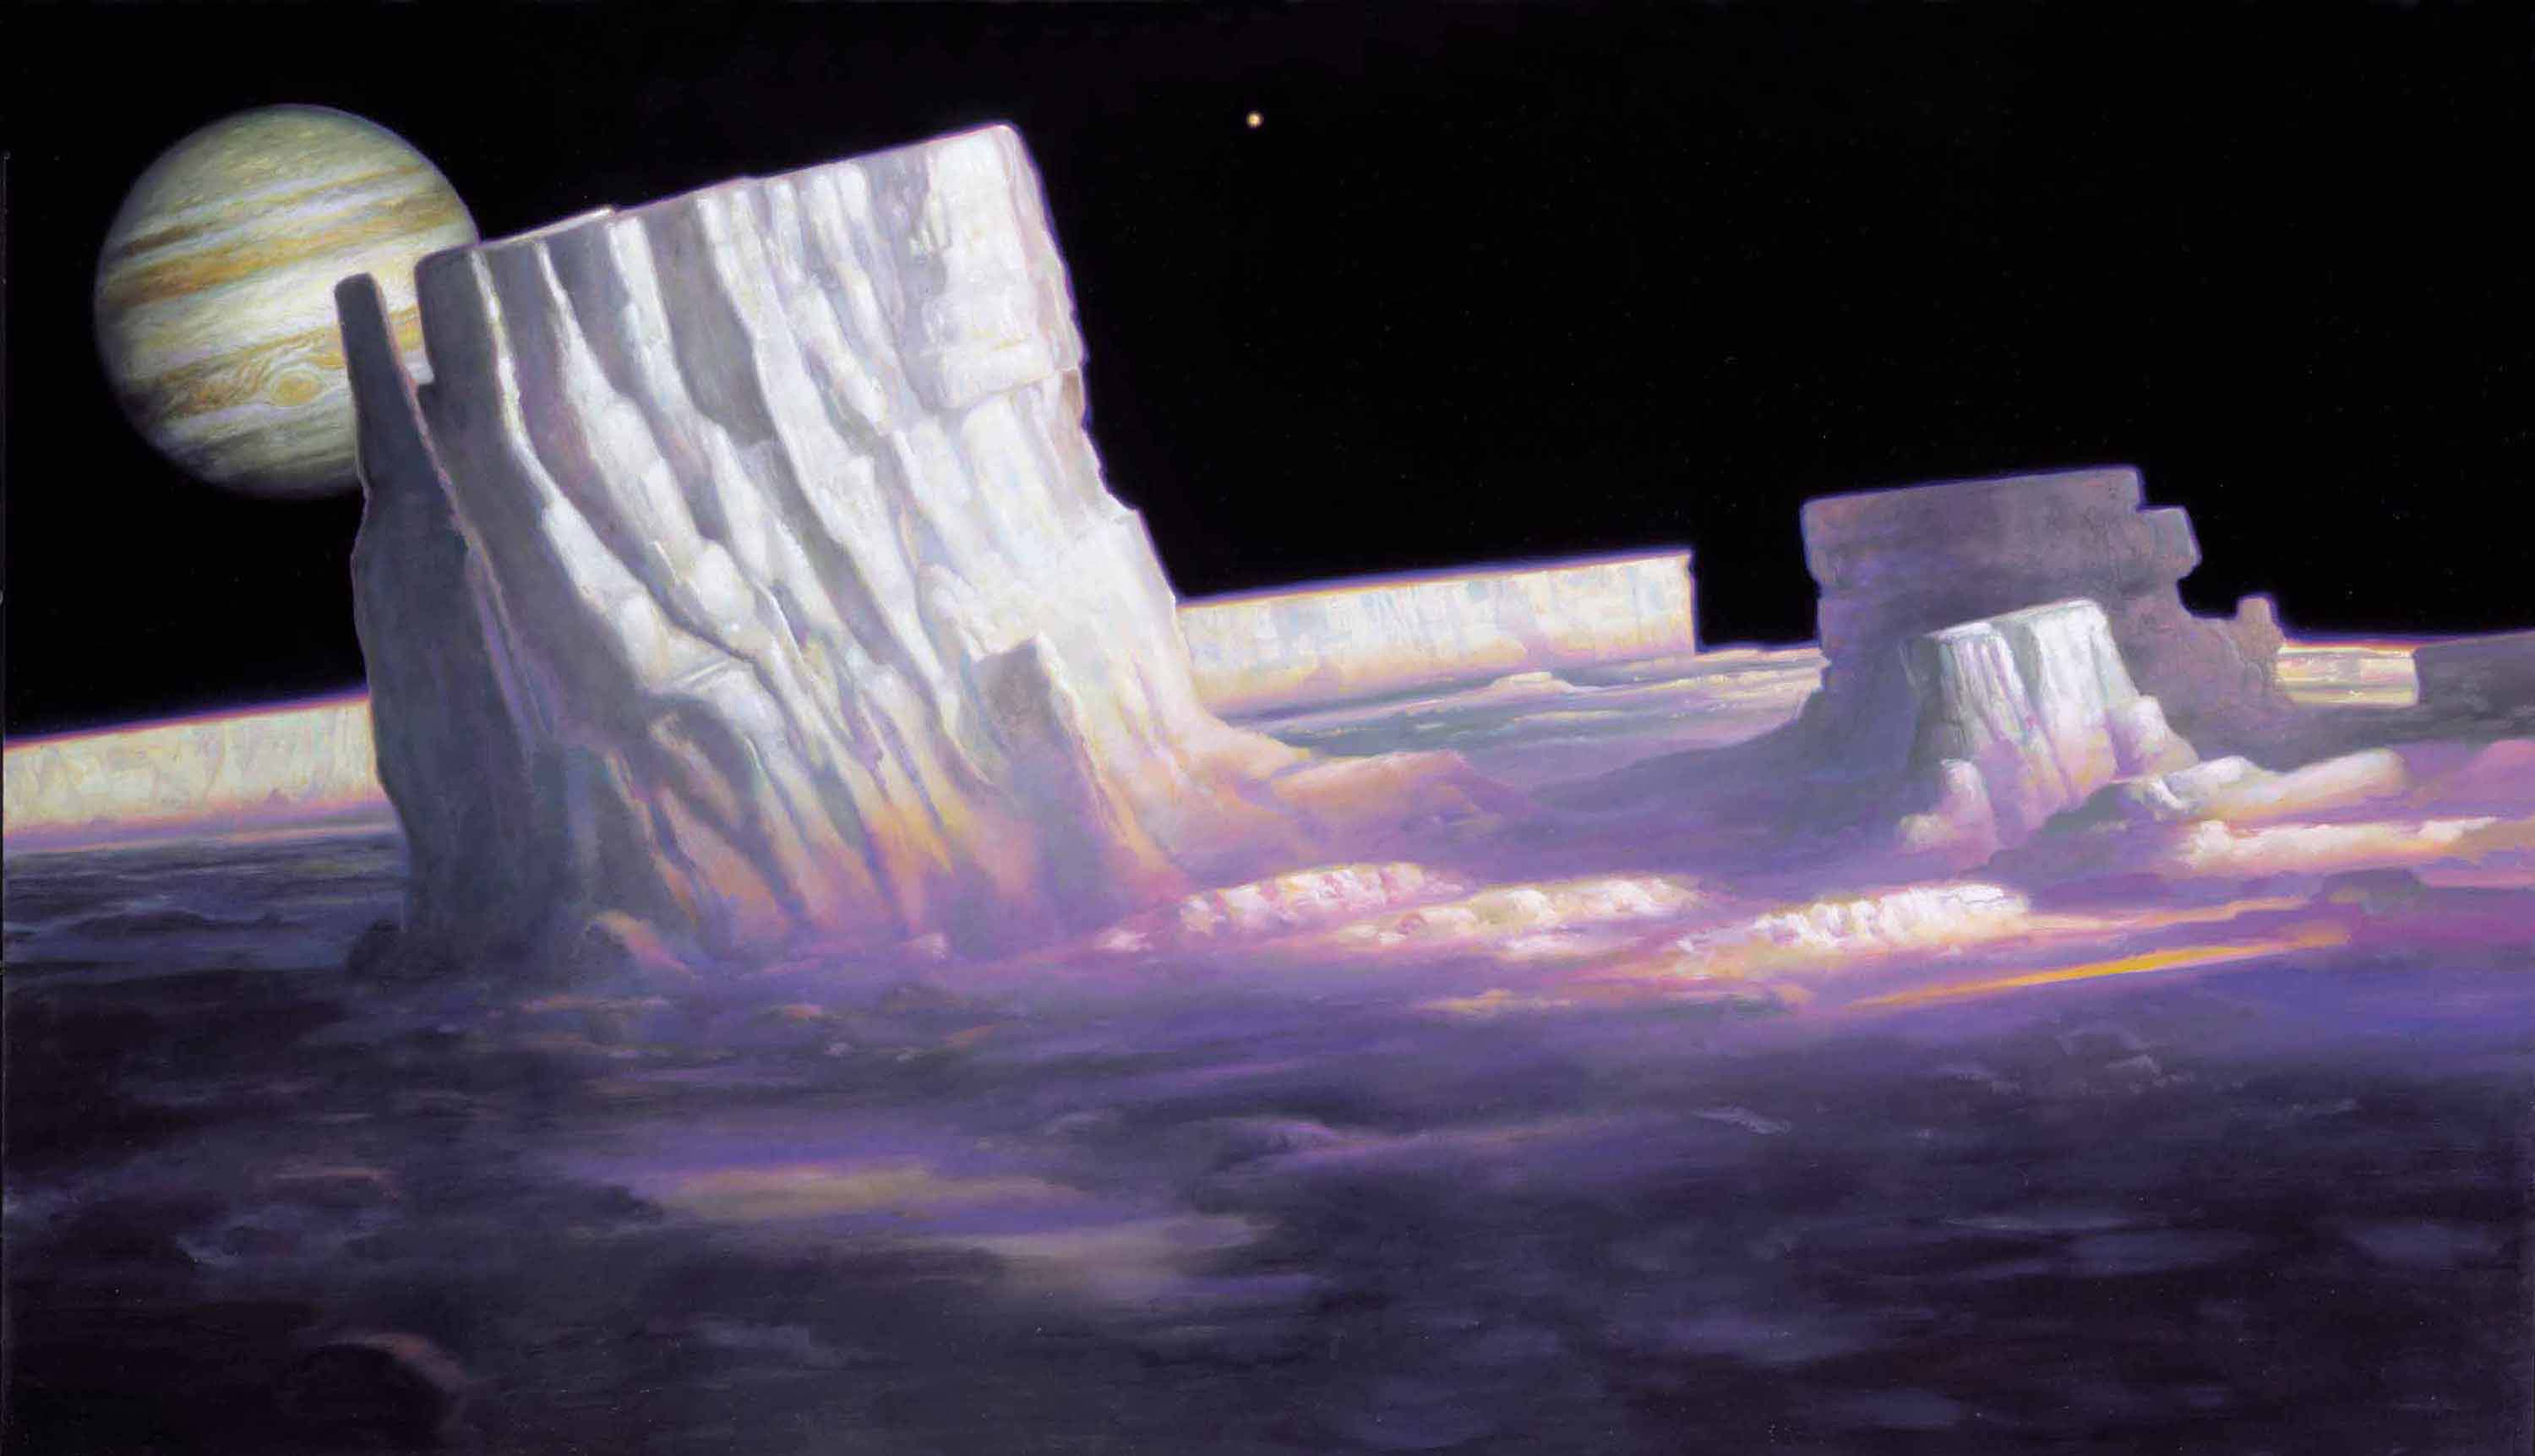 Permanent Sunset on Europa, Moon of Jupiter
27" x 48"  Oil on Panel  2001
private collection